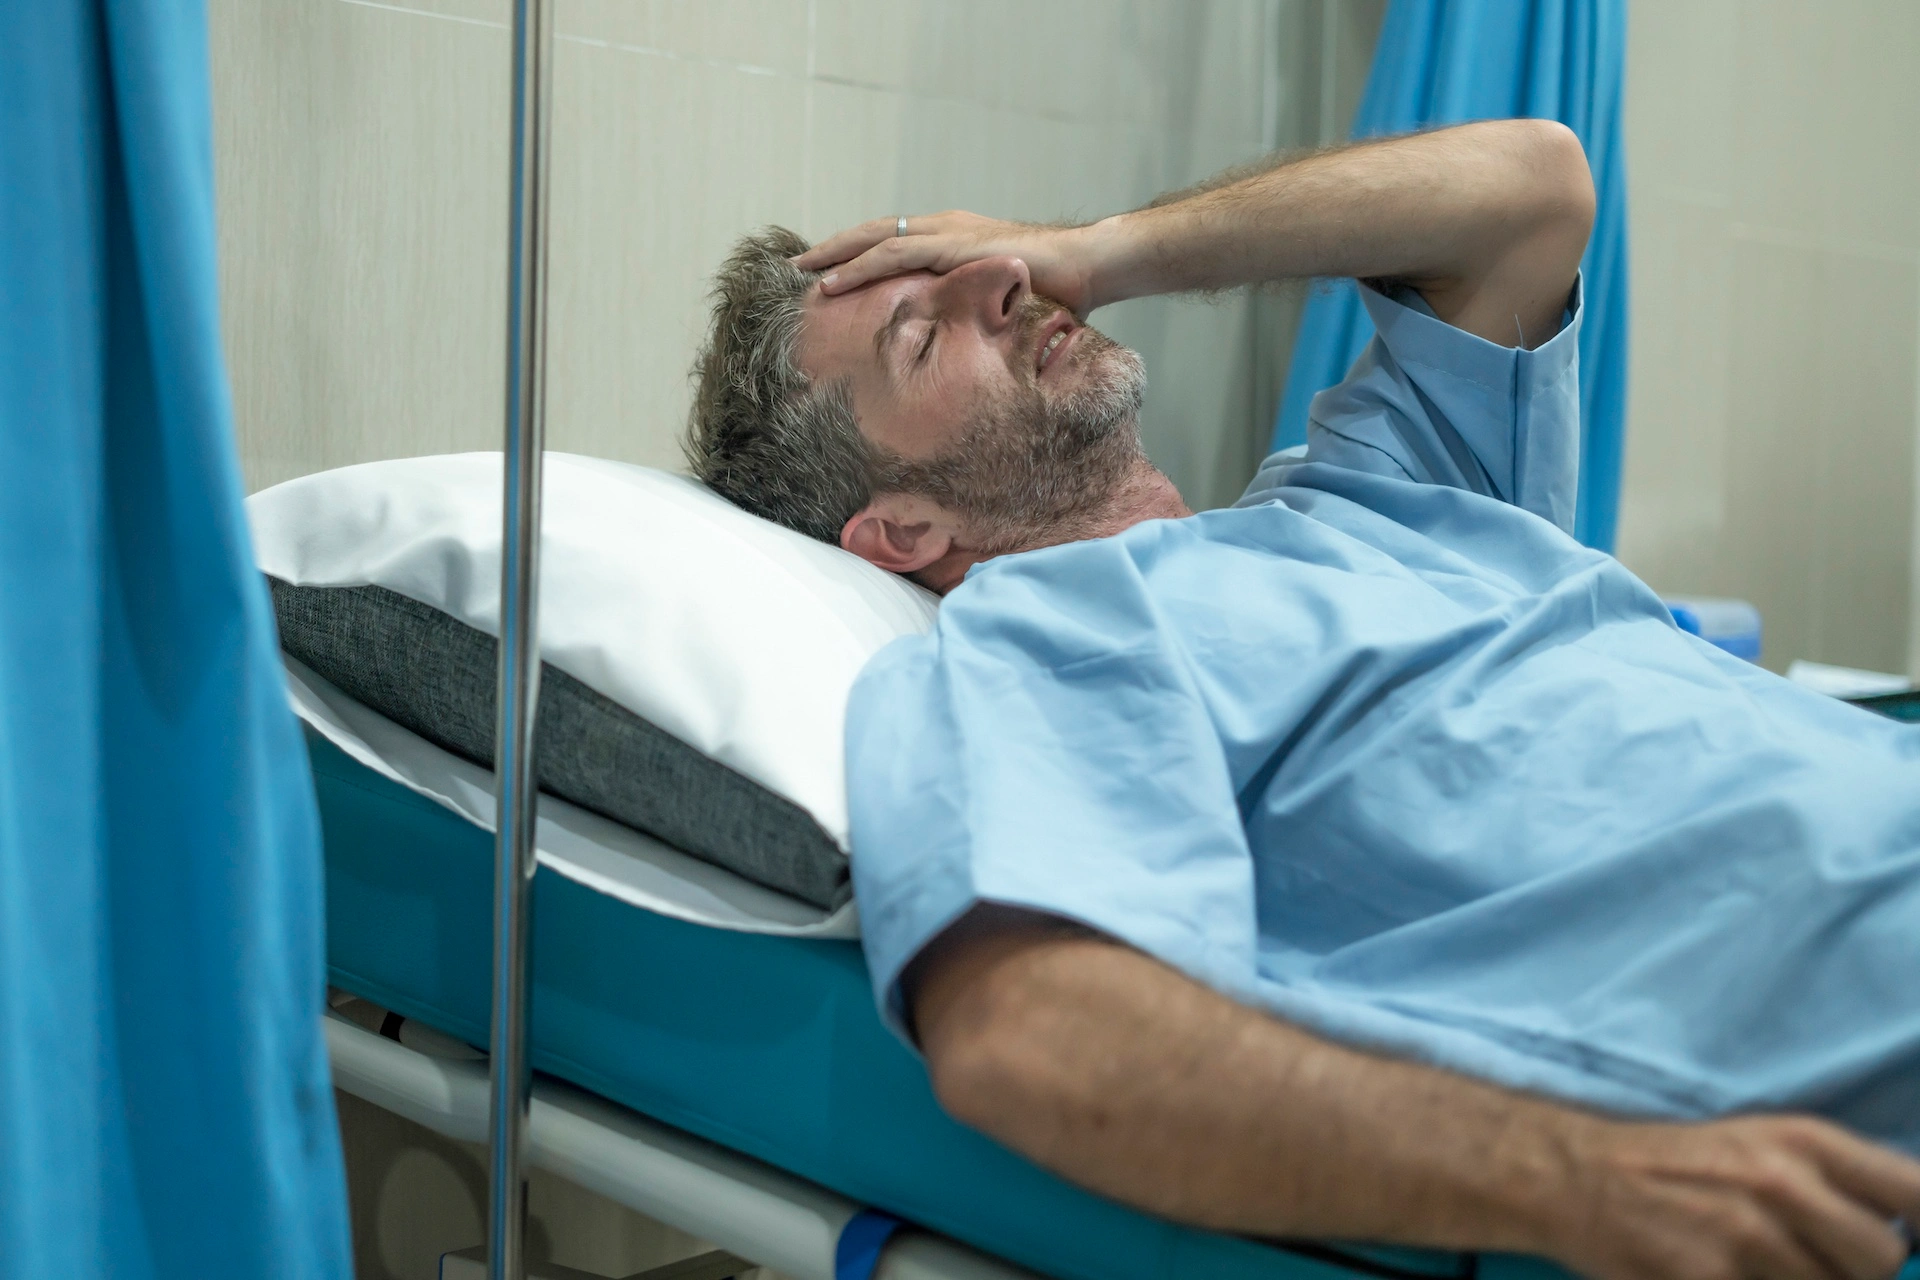 Emergency room physicians moving away from lumbar puncture for headache evaluation